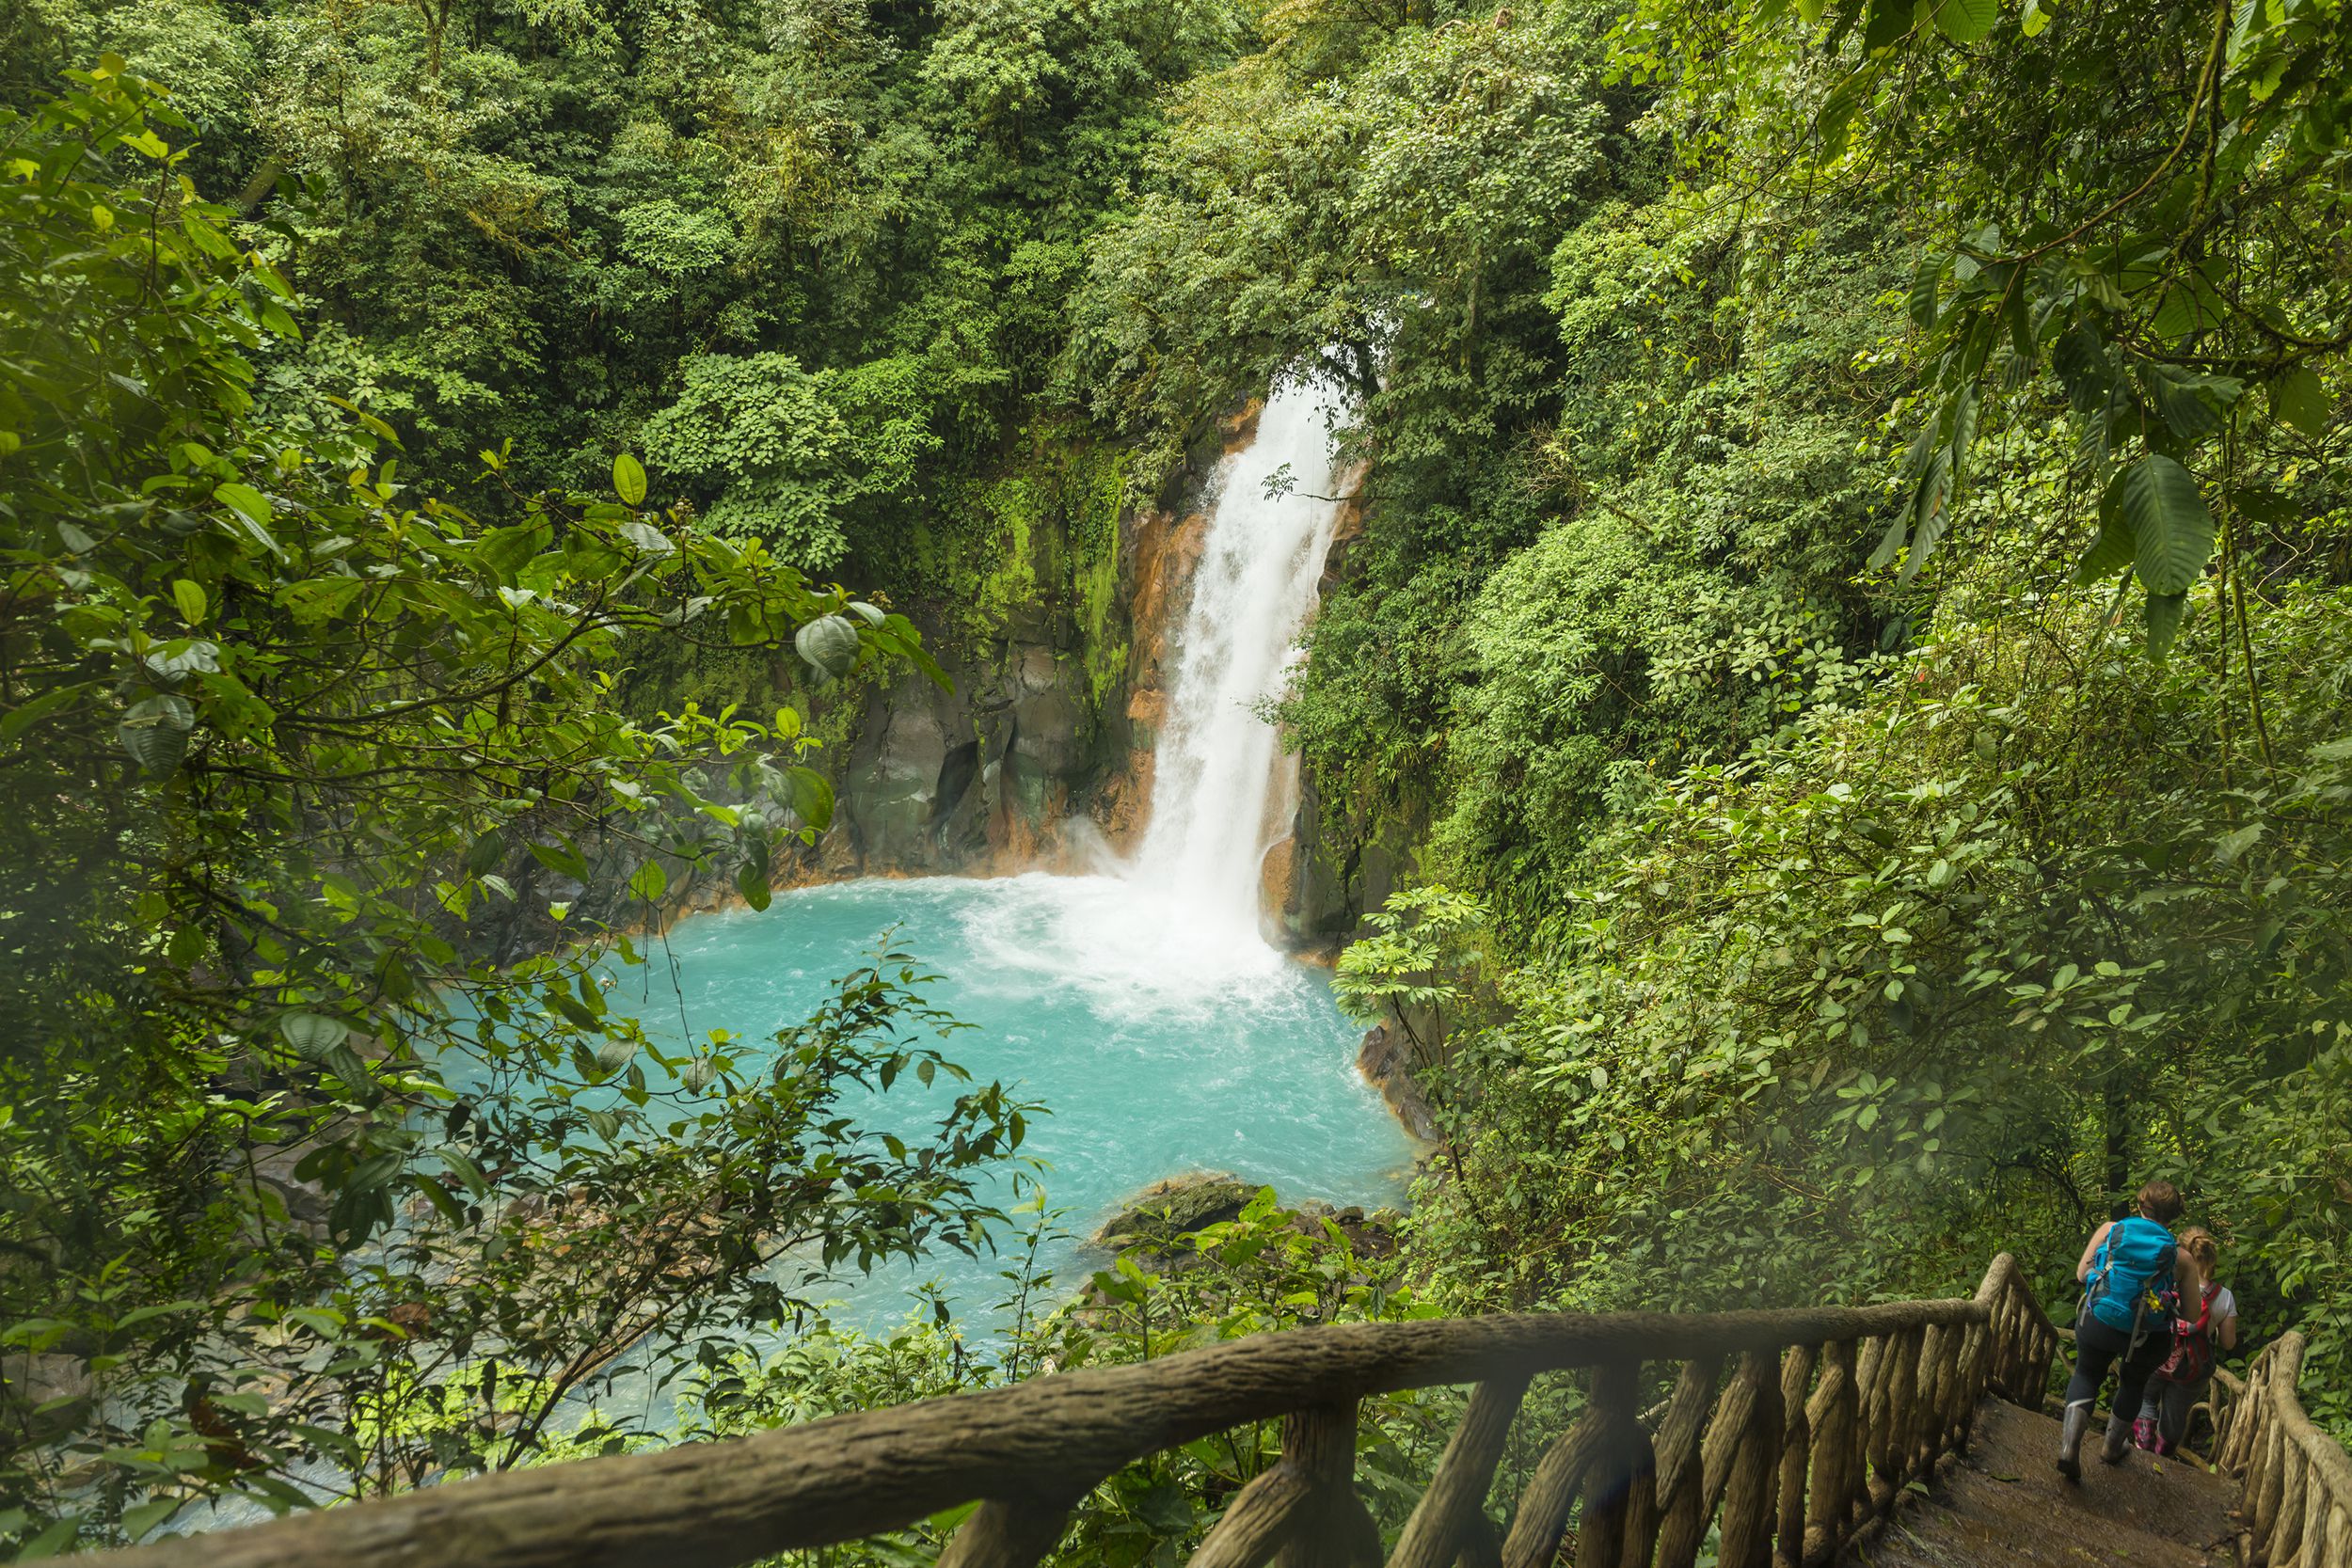 <p>Lonely Planet describes Costa Rica as a playground for families. Known for being home to some of the most stunning rainforests in the world, one of the most memorable ways to get up close is via a <a href="https://costaricaexperts.com/things-to-do/zip-line-canopy/">canopy tour</a>, which involves sightseeing via zip line. River rafting, exploring waterfalls, surfing, and wildlife watching are among the other kid favorites here. And did we mention the volcanos? </p>